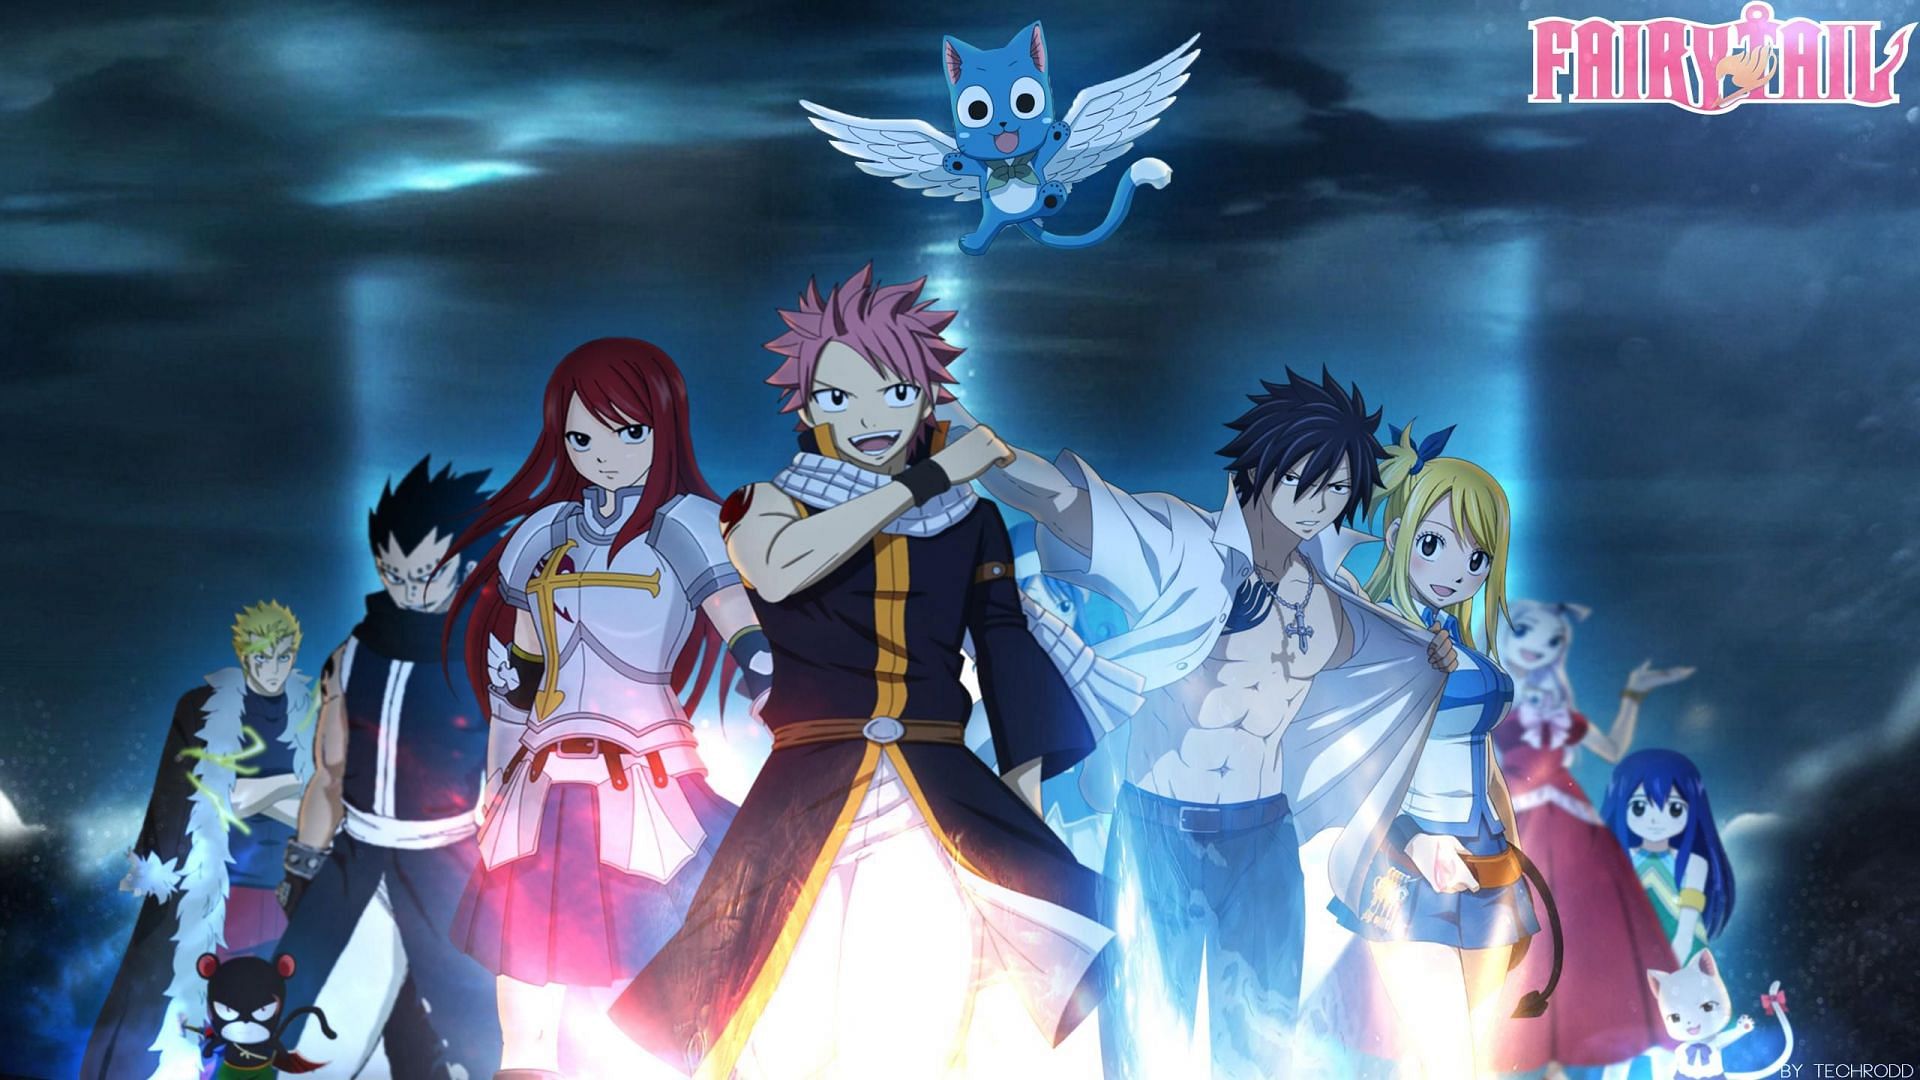 Anime Review: Fairy Tail | Merlin's Musings